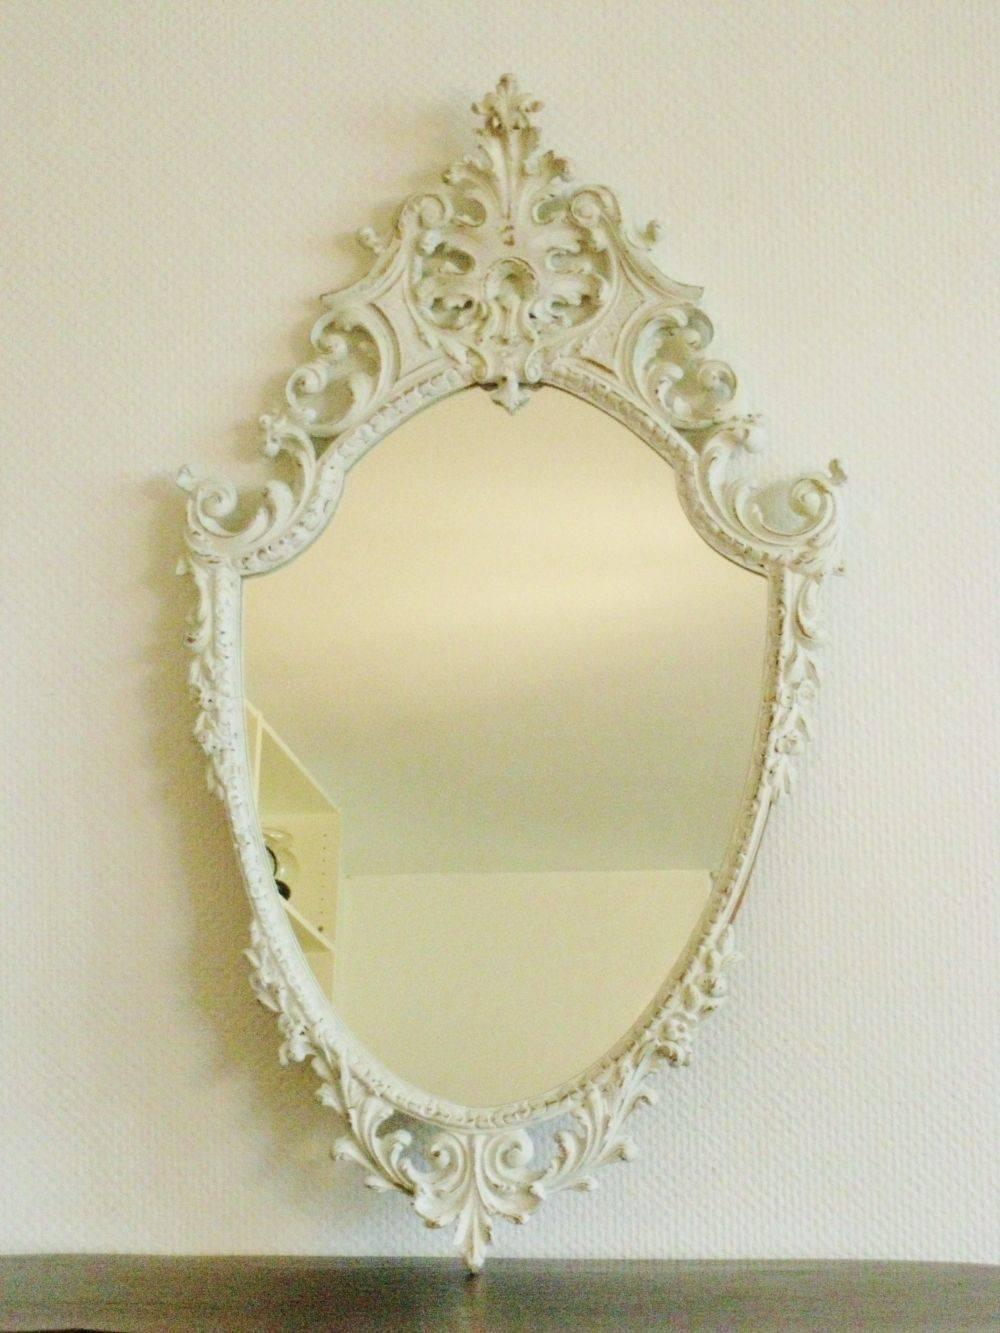 A wonderful Rococo style gilded and white carved wood arched top mirror crafted with fine artistic detail, adding beauty and elegance to any room. 
Measures: Height 38 in (96.5 cm)
Width 22 in (56 cm)
Depth (arched top): 5 in (12.5 cm).
 